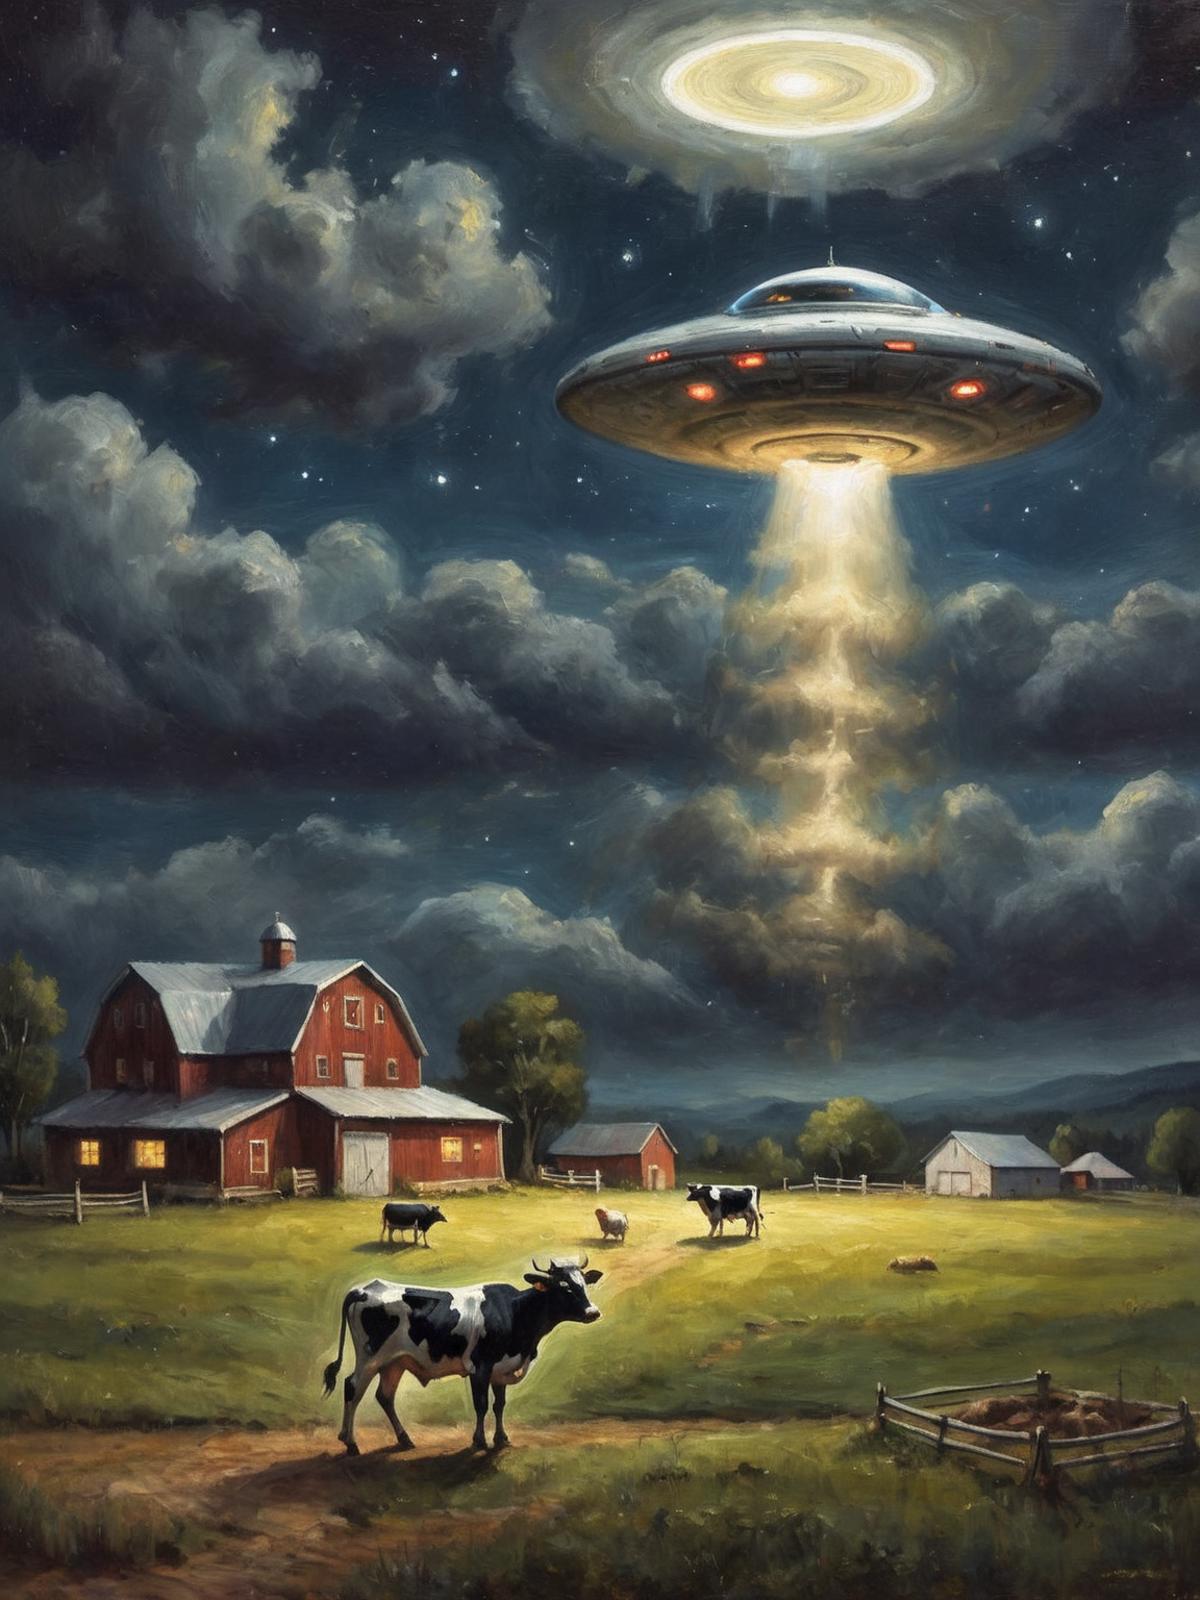 A painting of a cow and a spaceship in the sky.